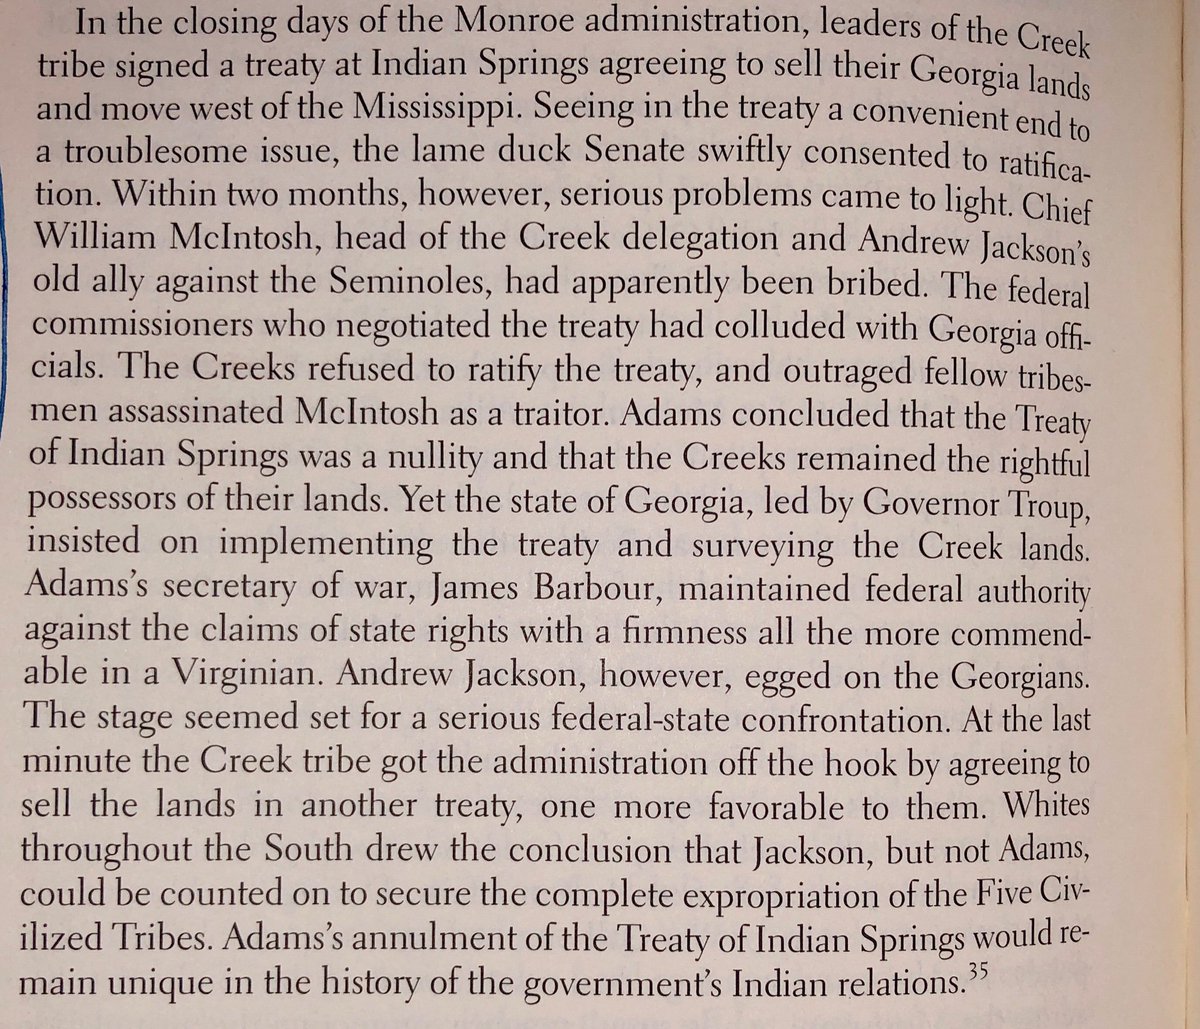 John Quincy Adams’ decision to annul the treaty with the Creeks for Georgian land—on account of bribery—“would remain unique in the history of the government’s Indian relations.” (“Andrew Jackson, however, egged on the Georgians.”)